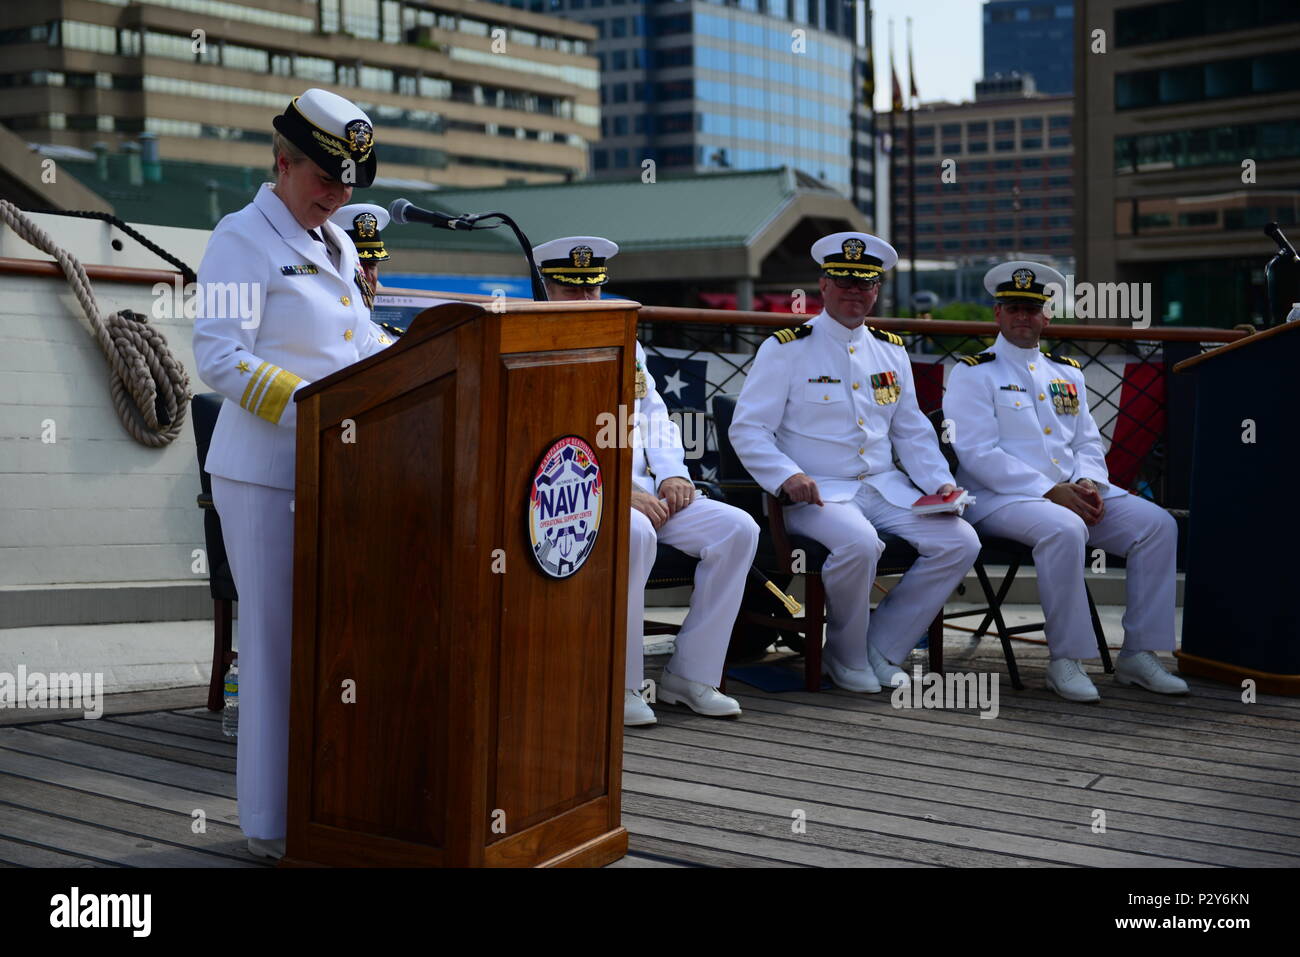 160806-N-DD899-206 BALTIMORE, Md. (Aug. 8, 2016) Vice Adm. Robin R. Braun, left, Chief of Navy Reserve, Commander, Navy Reserve Force, delivers remarks during the Navy Operational Support Center (NOSC) Batimore change of command ceremony aboard USS Constellation in Baltimore Inner Harbor. Cmdr. Tasya Lacy relieved Cmdr. John B. Downes as the NOSC Baltimore commanding officer. (U.S. Navy photo by Mass Communication Specialist 1st Class Sharay Bennett/Released) Stock Photo